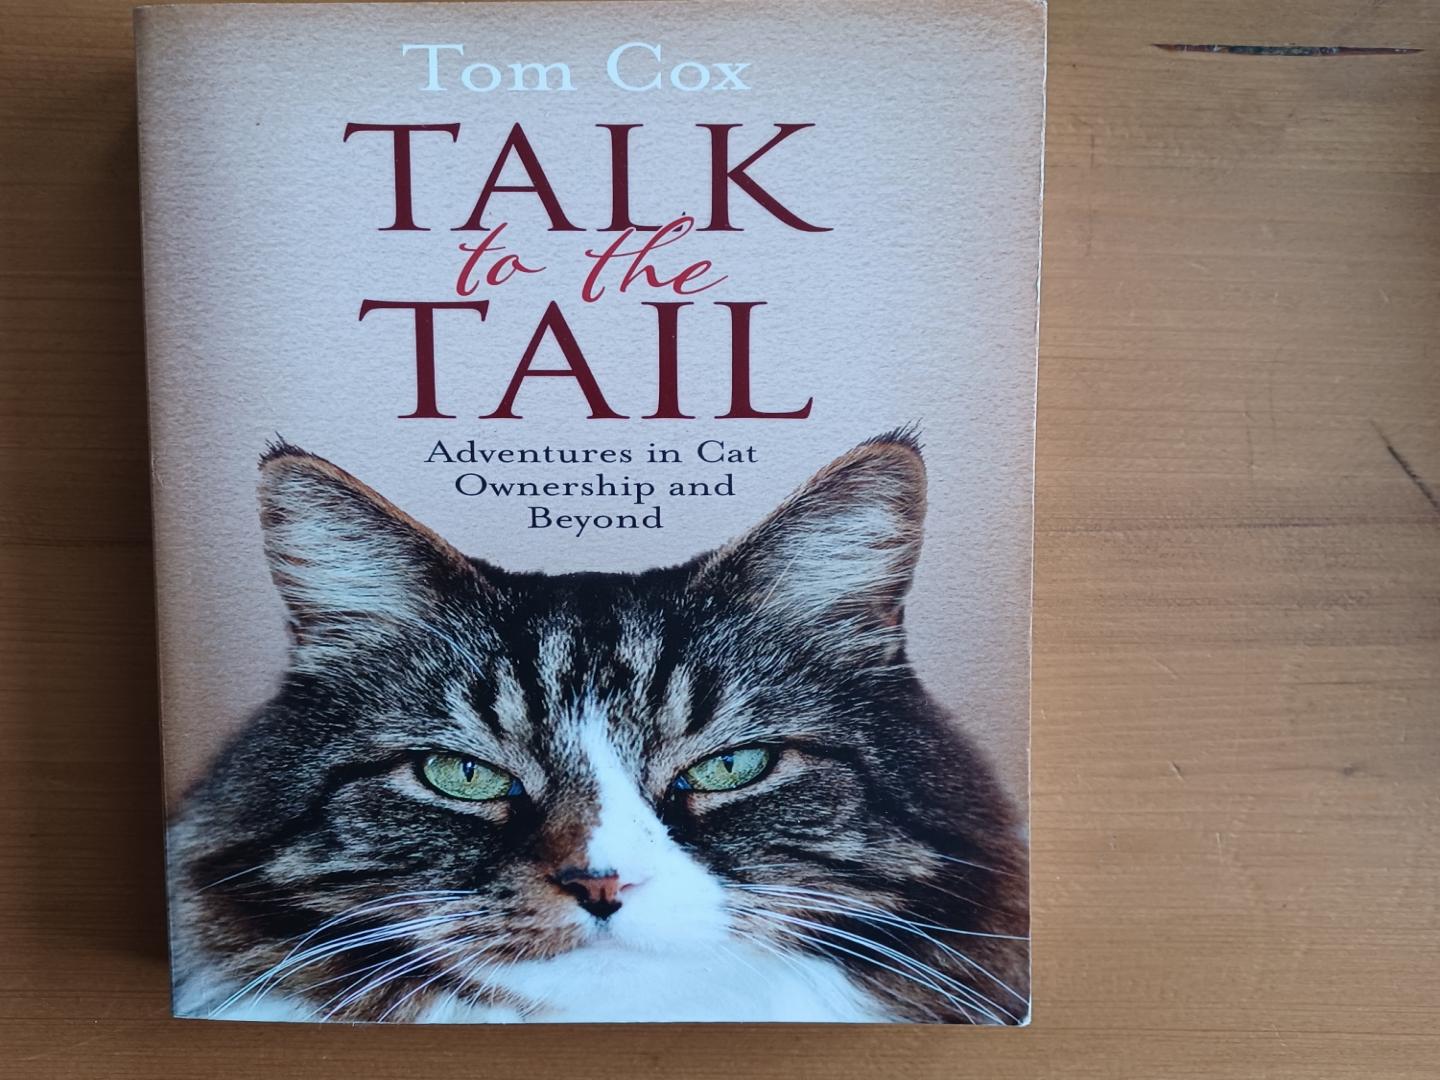 Cox, Tom - Talk to the Tail / Adventures in Cat Ownership and Beyond